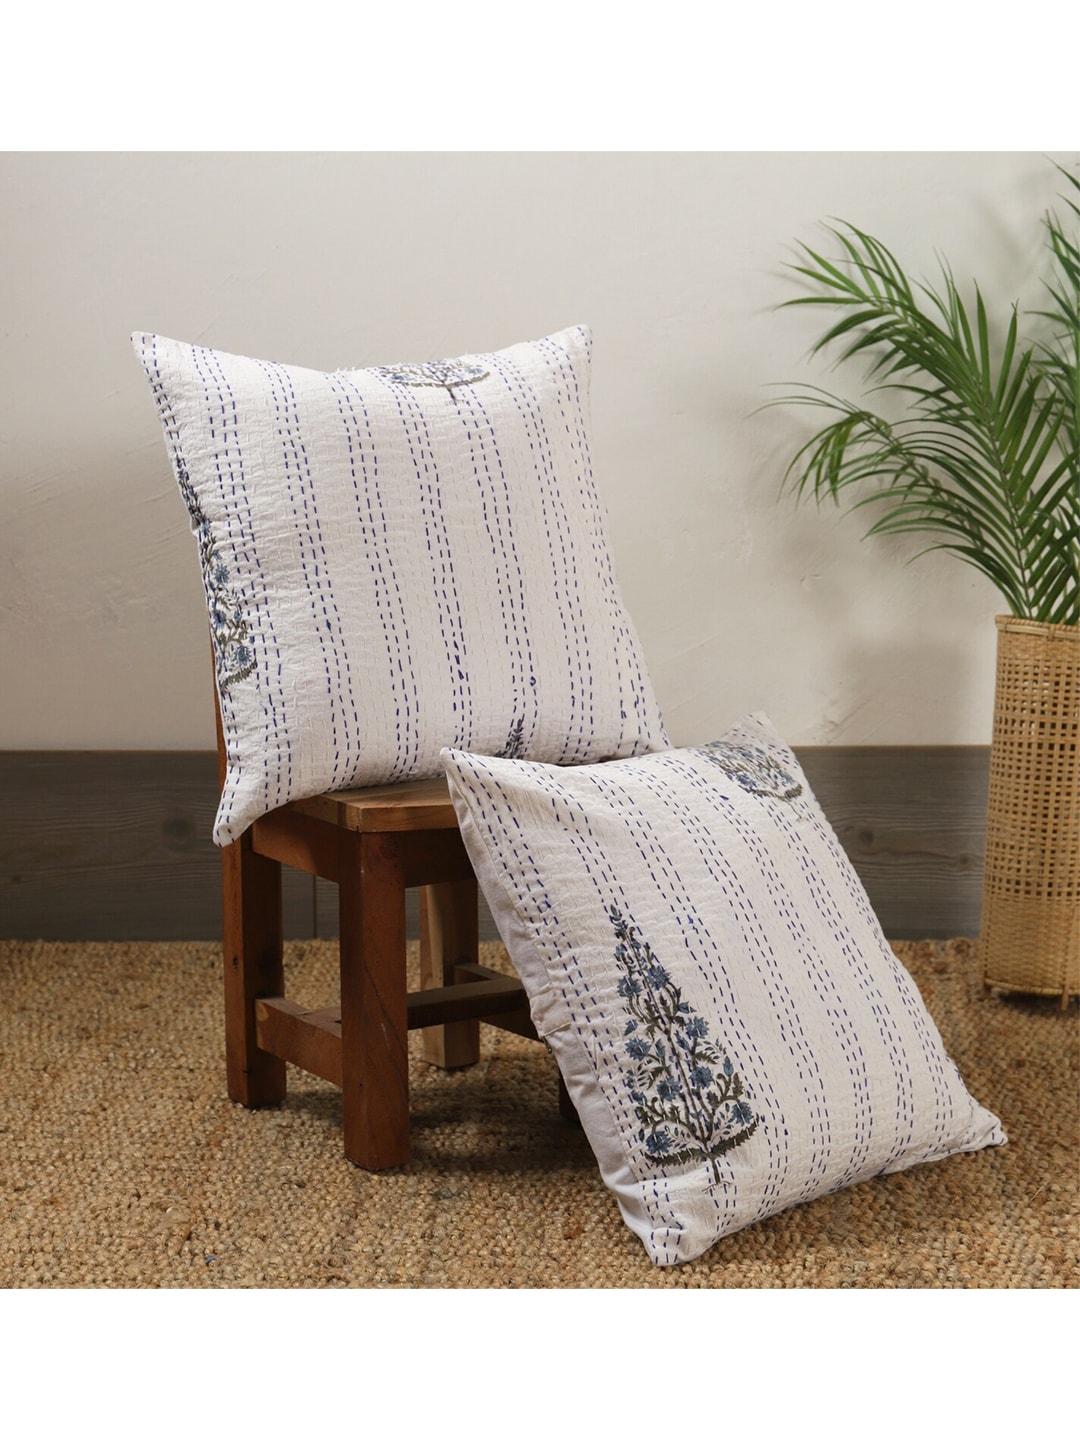 HANDICRAFT PALACE White & Blue Set of 2 Floral Square Cushion Covers Price in India